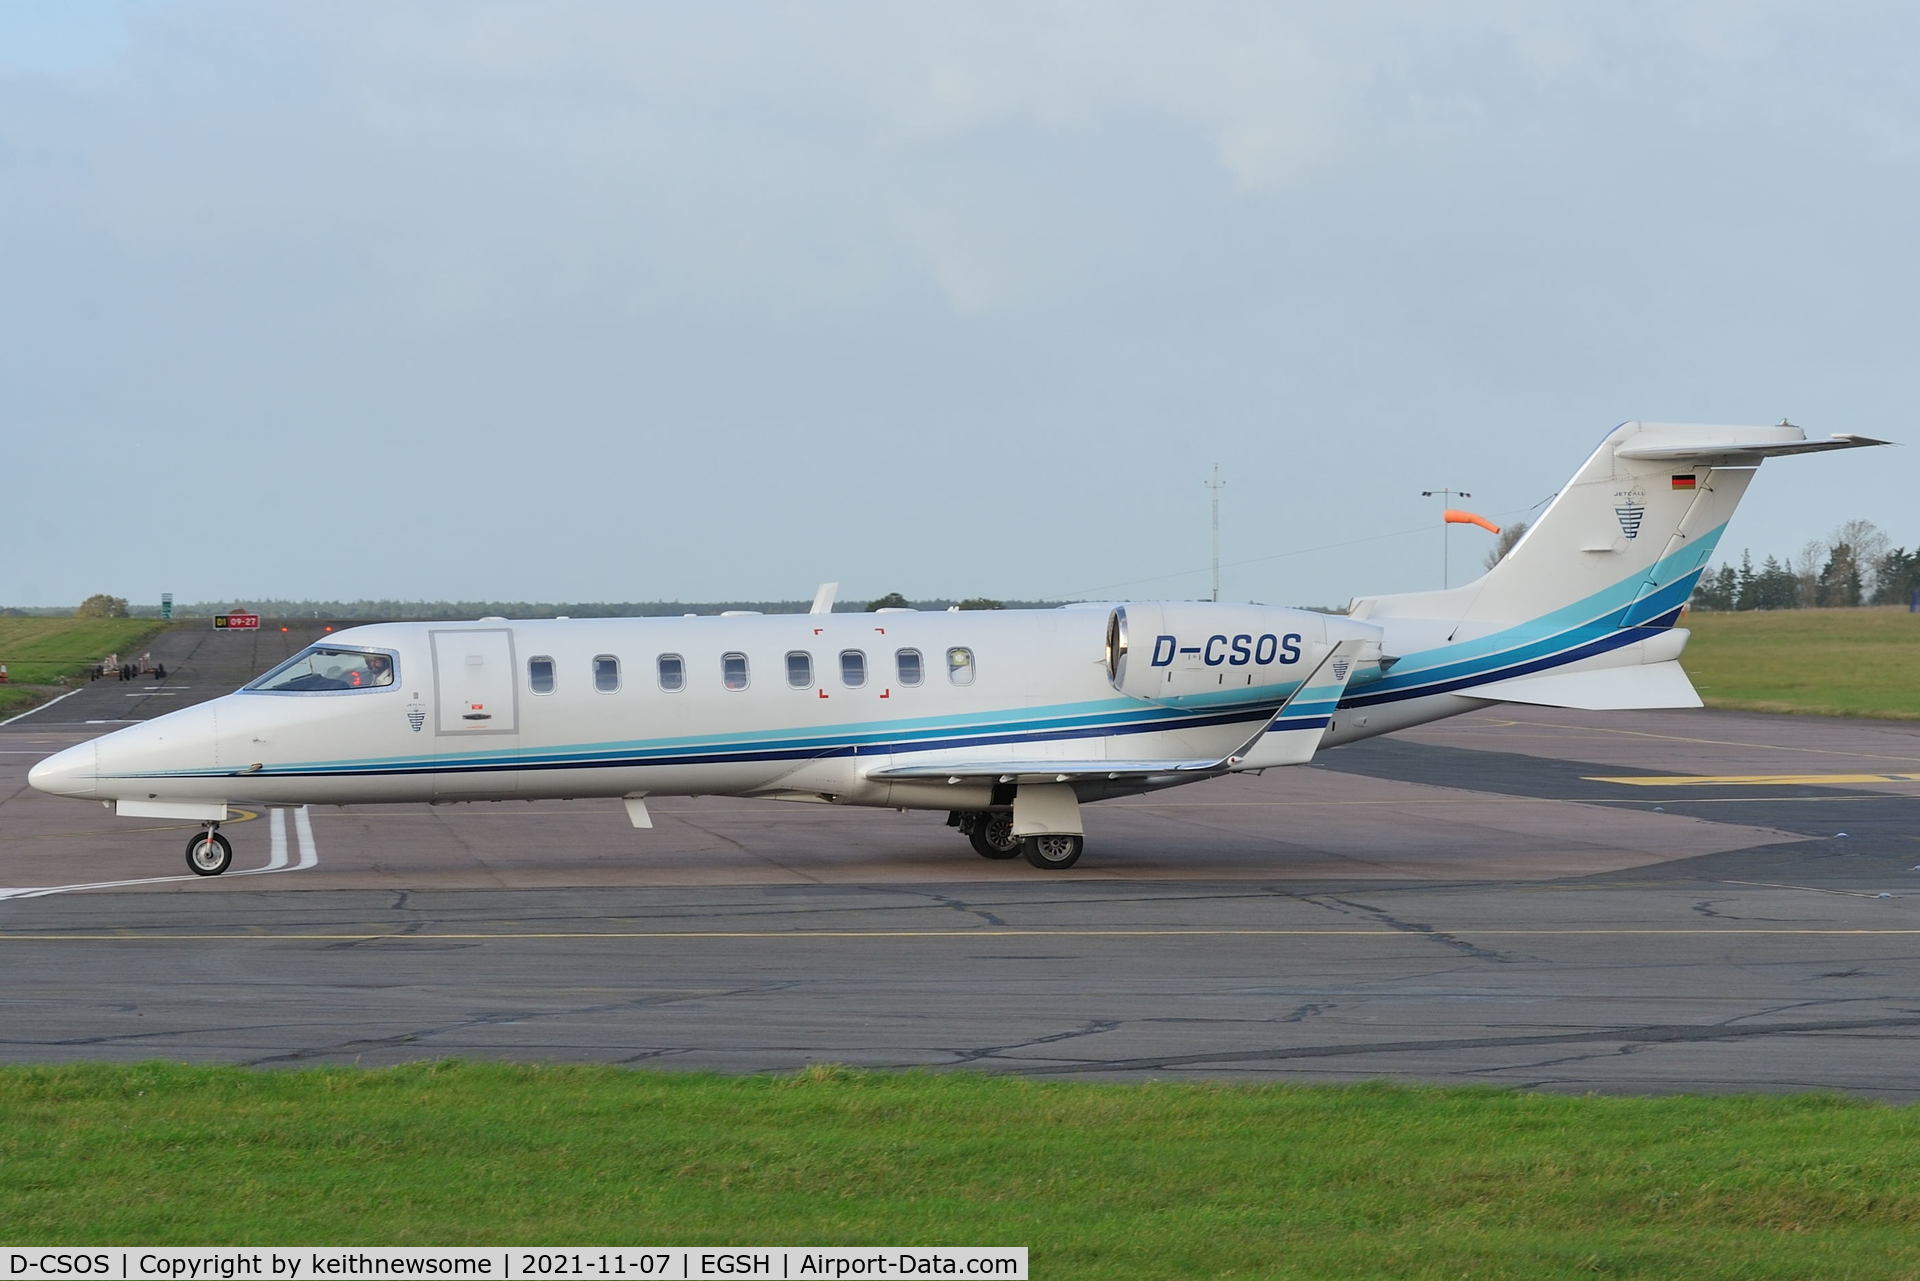 D-CSOS, 2001 Learjet 45 C/N 45-161, Arriving at Norwich from Tenerife.